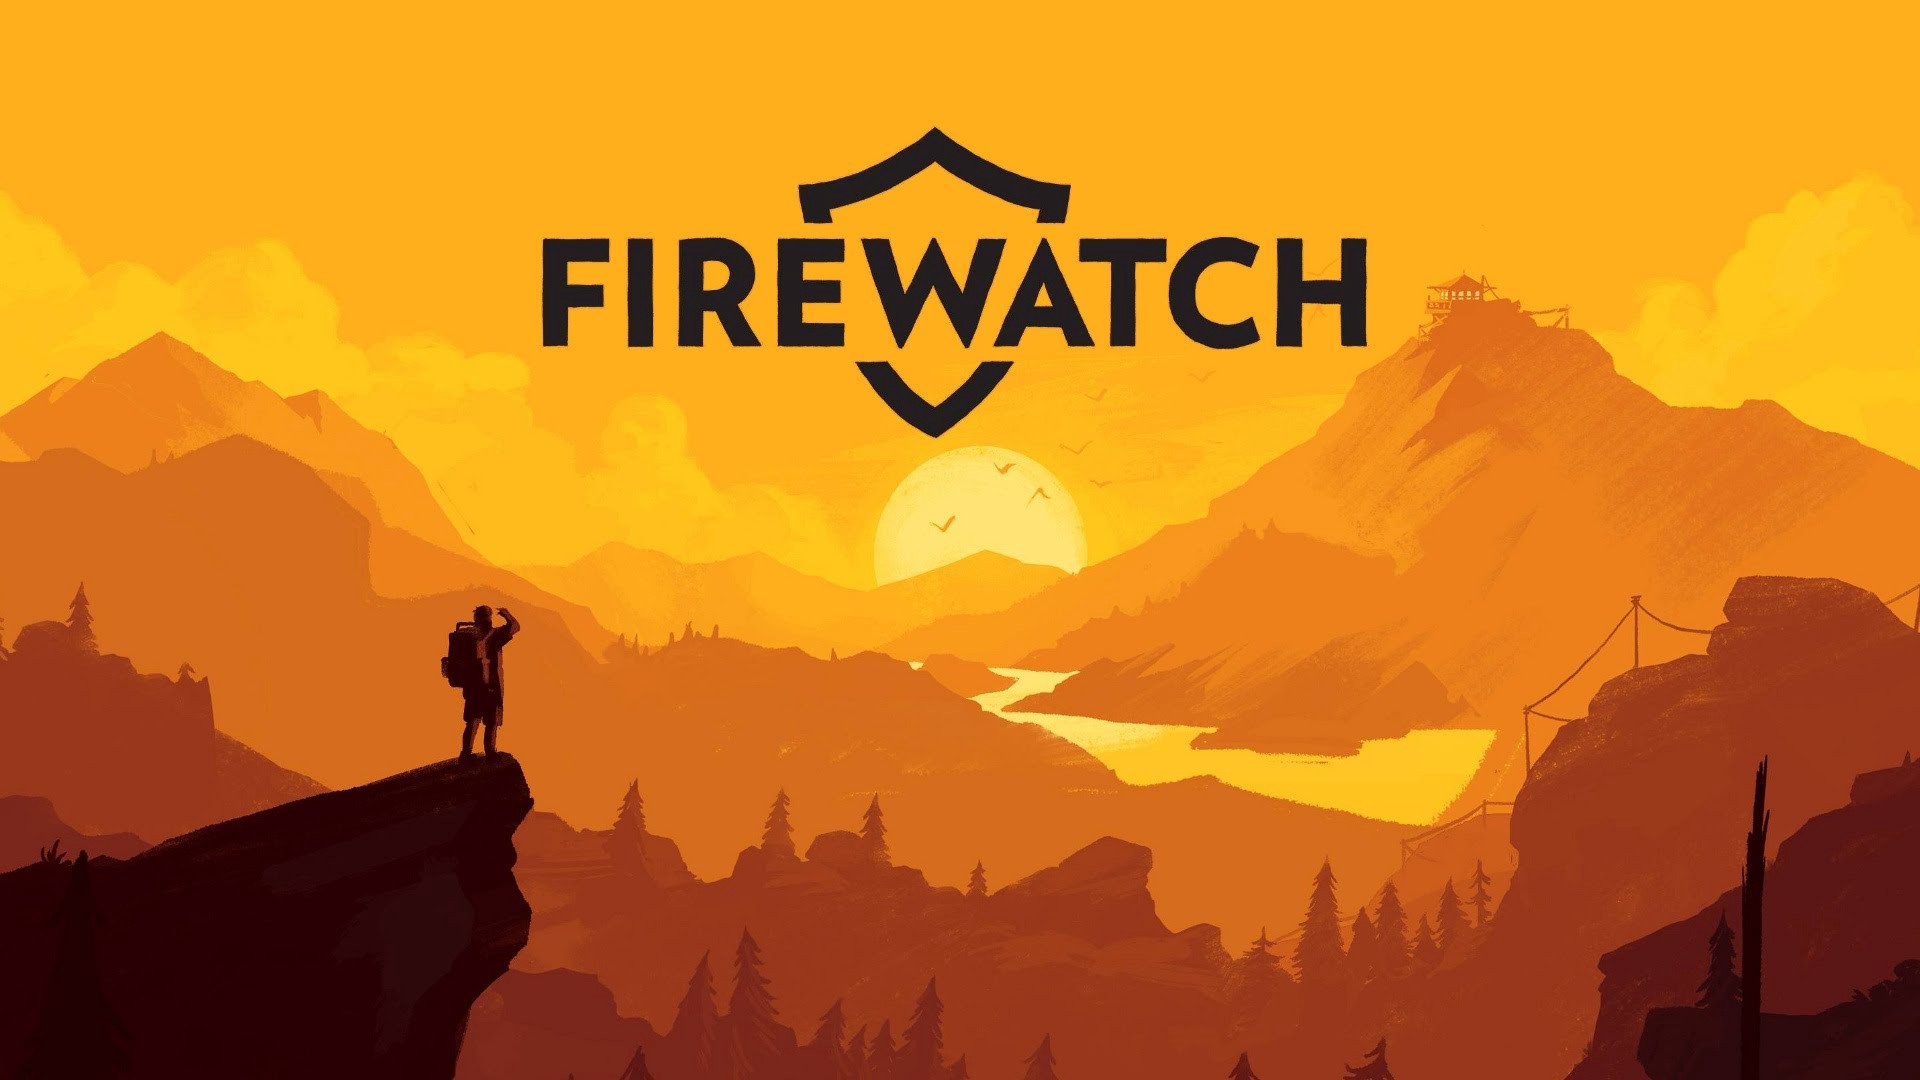 Indie Studio And Creators of Firewatch, Campo Santo Acquired By Valve